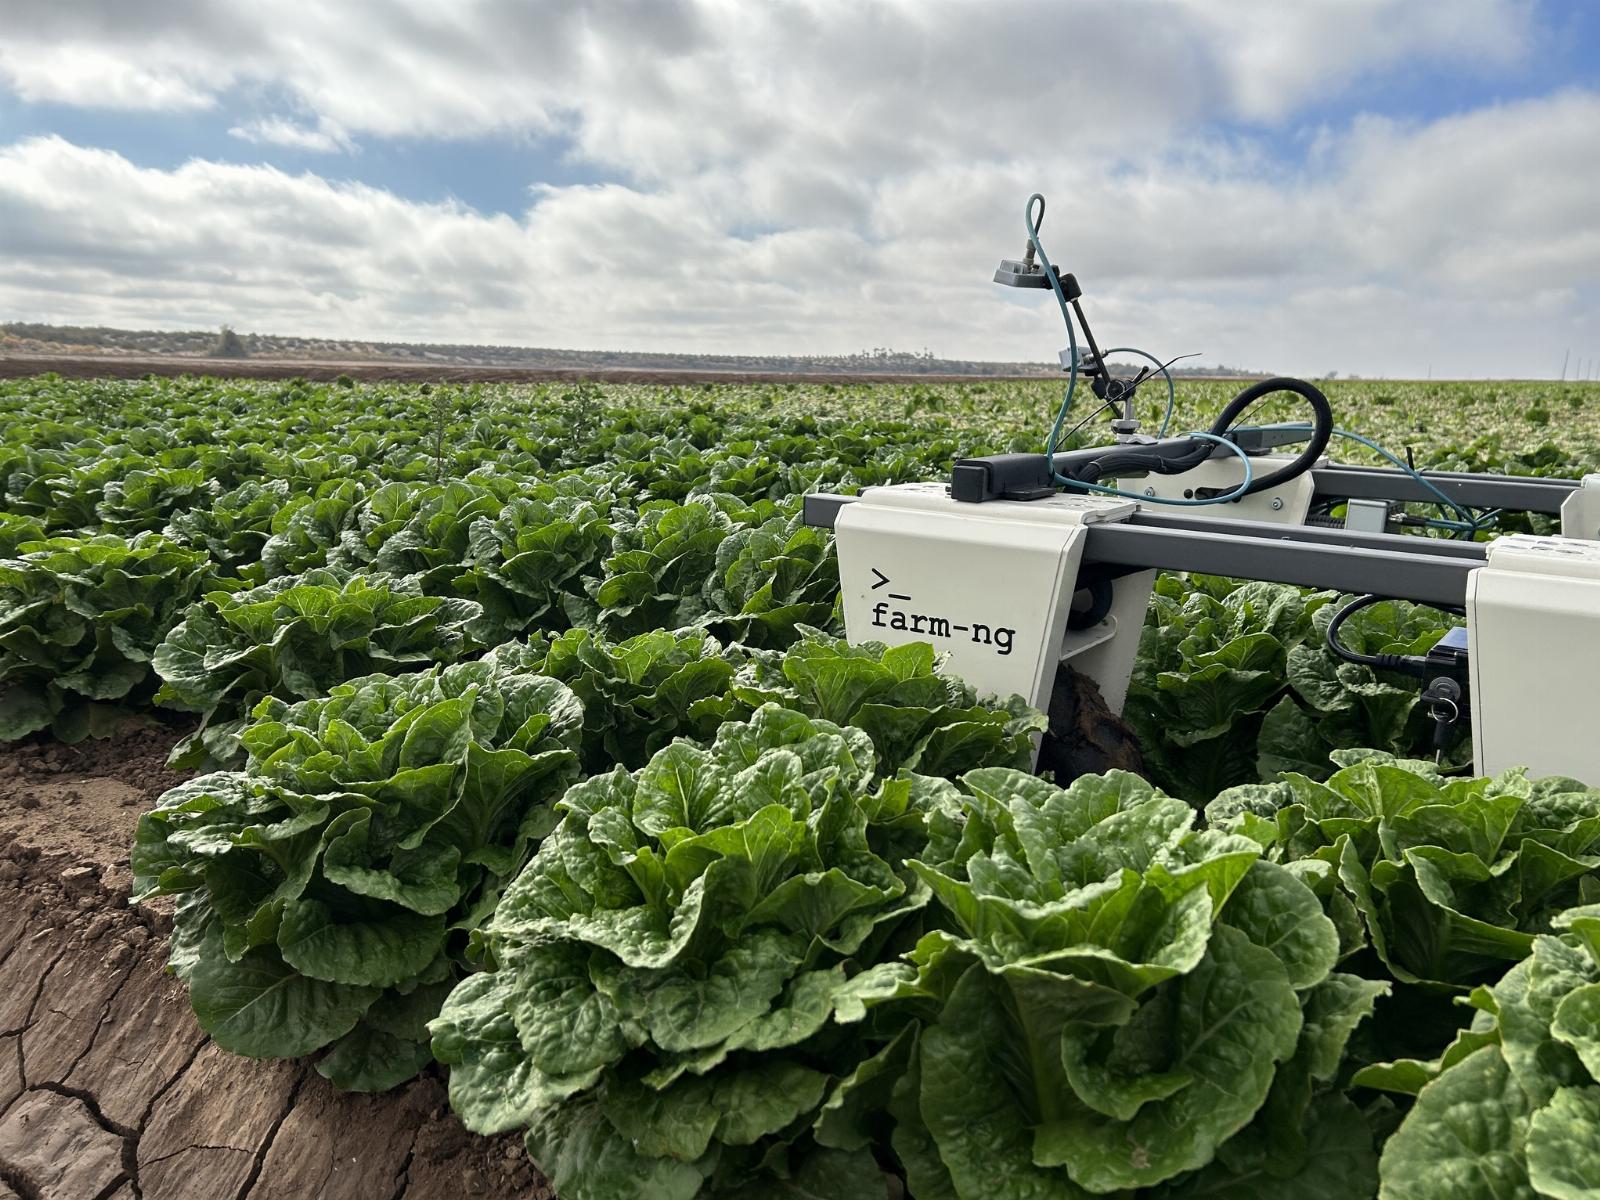 Farm-ng makes modular robots for a broad range of agricultural work